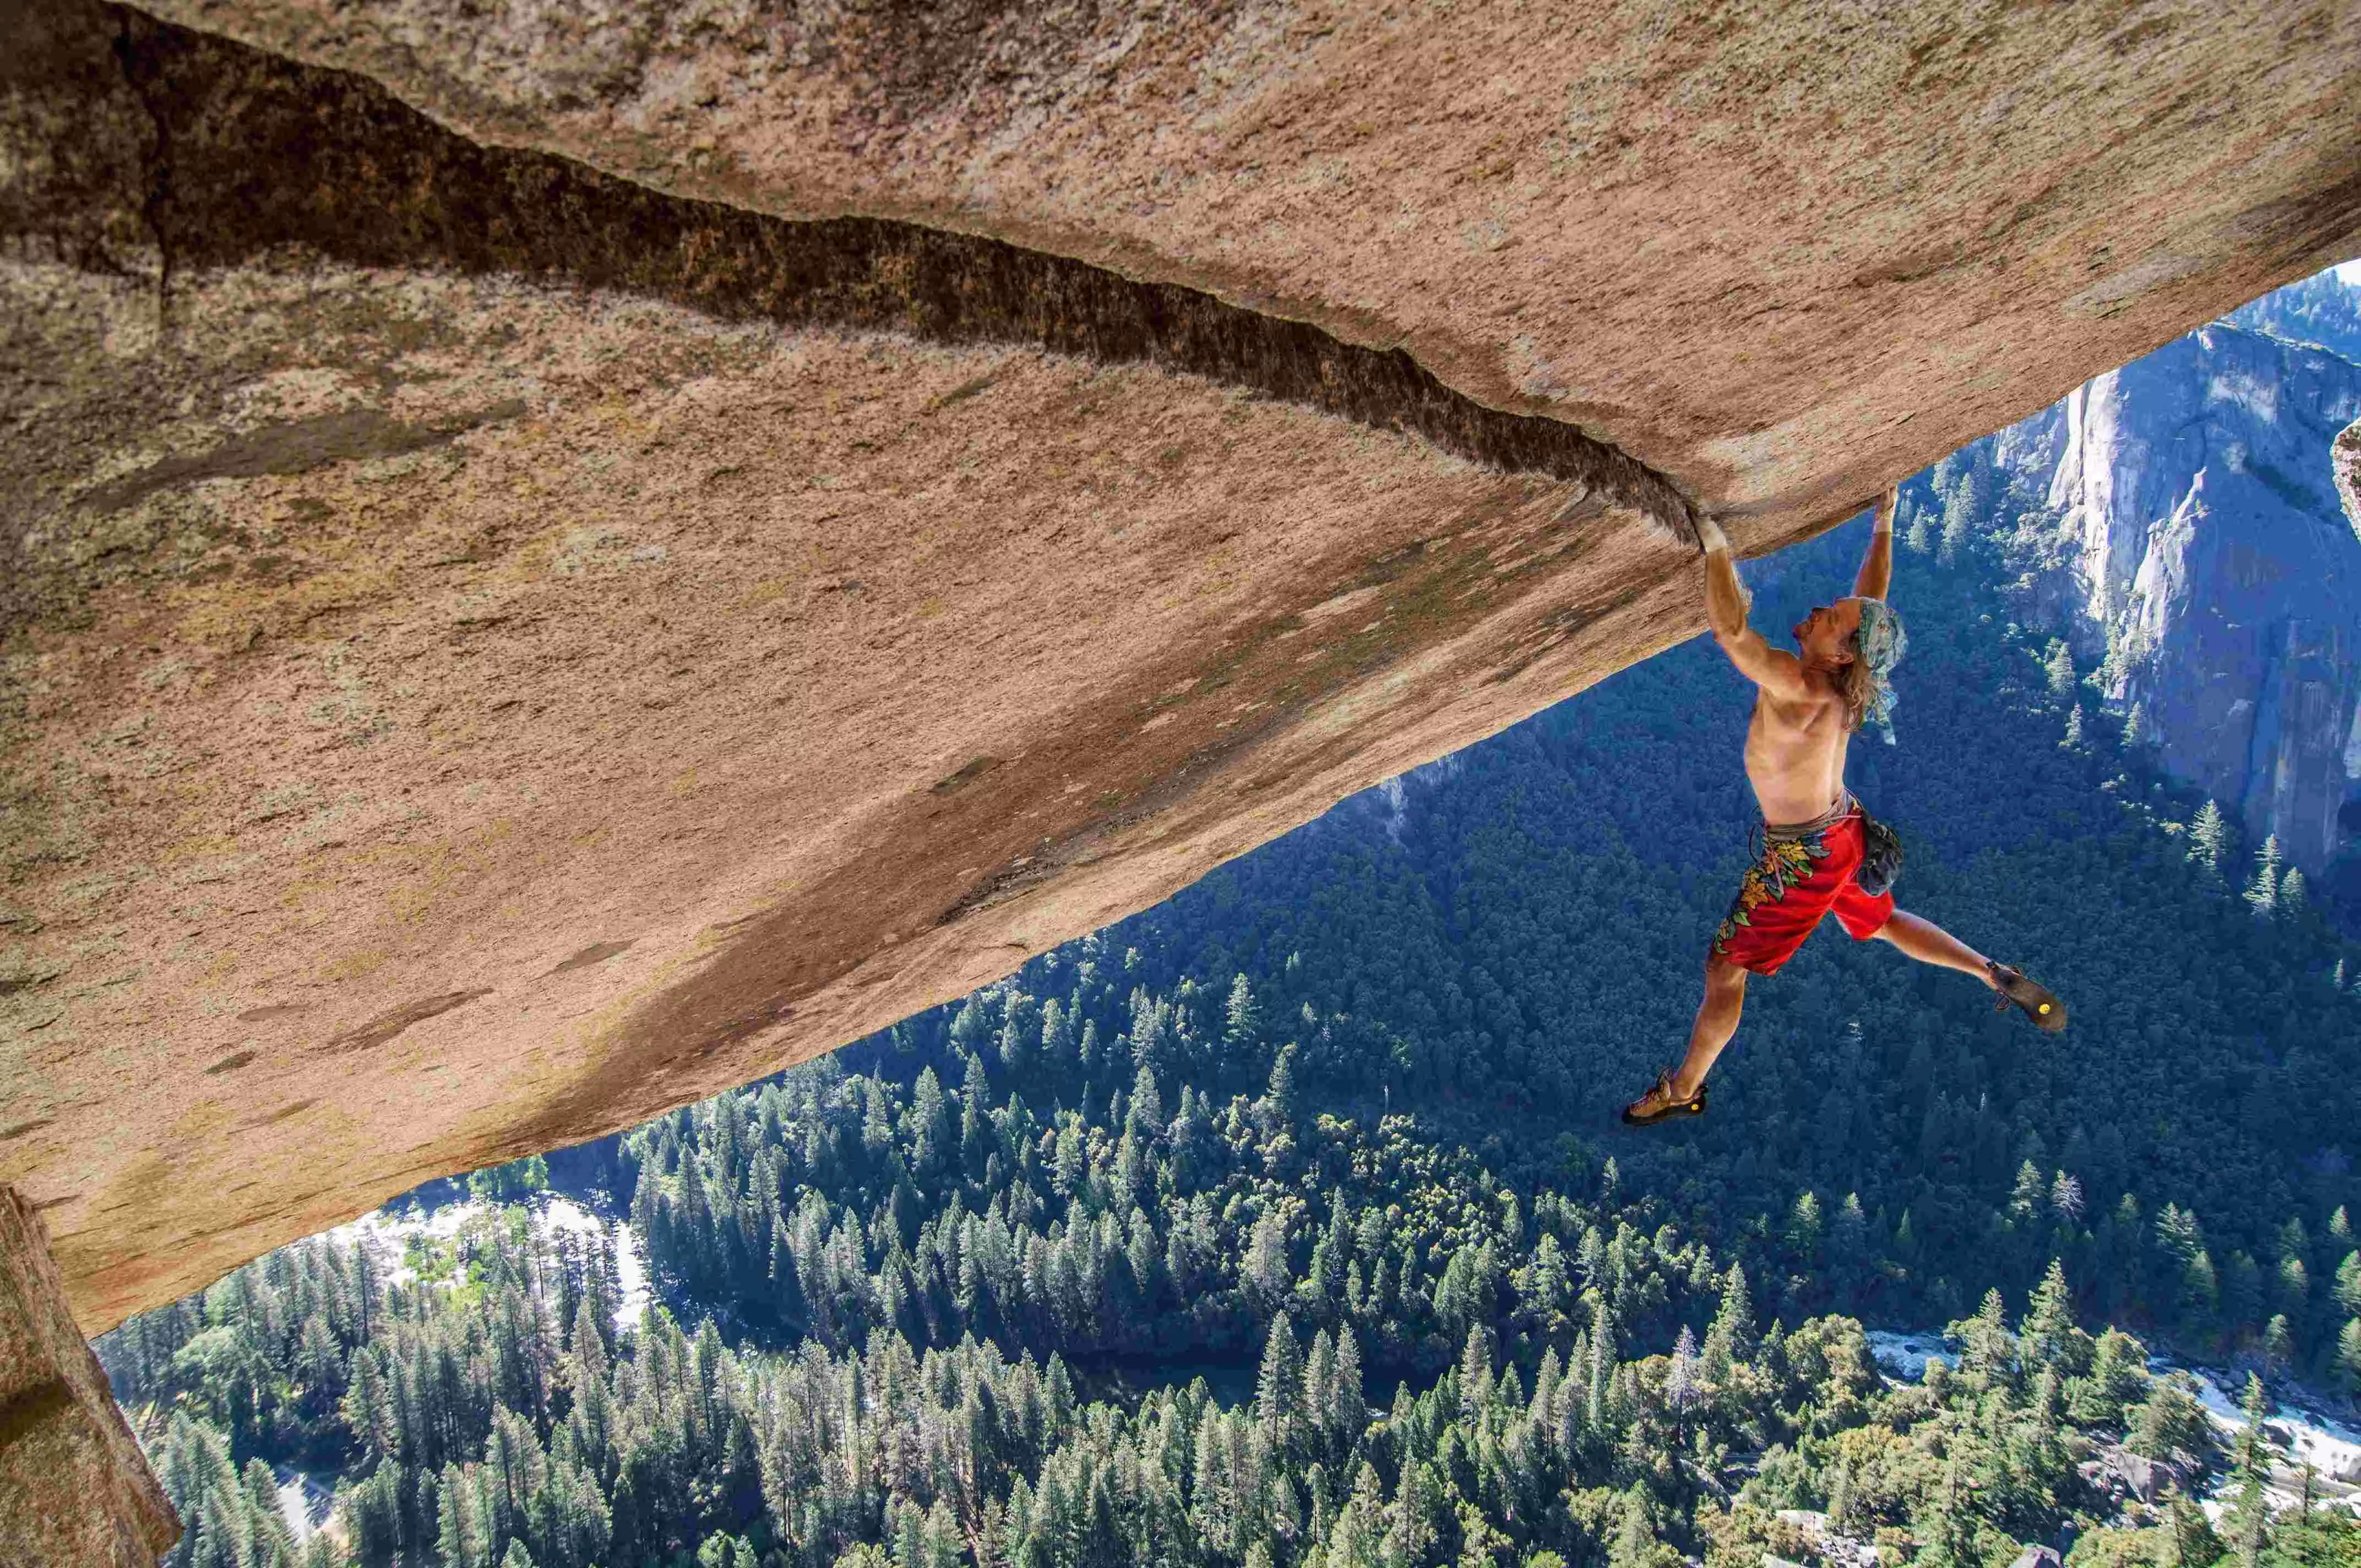 From solo climbing to cave diving: The most extreme sports in the